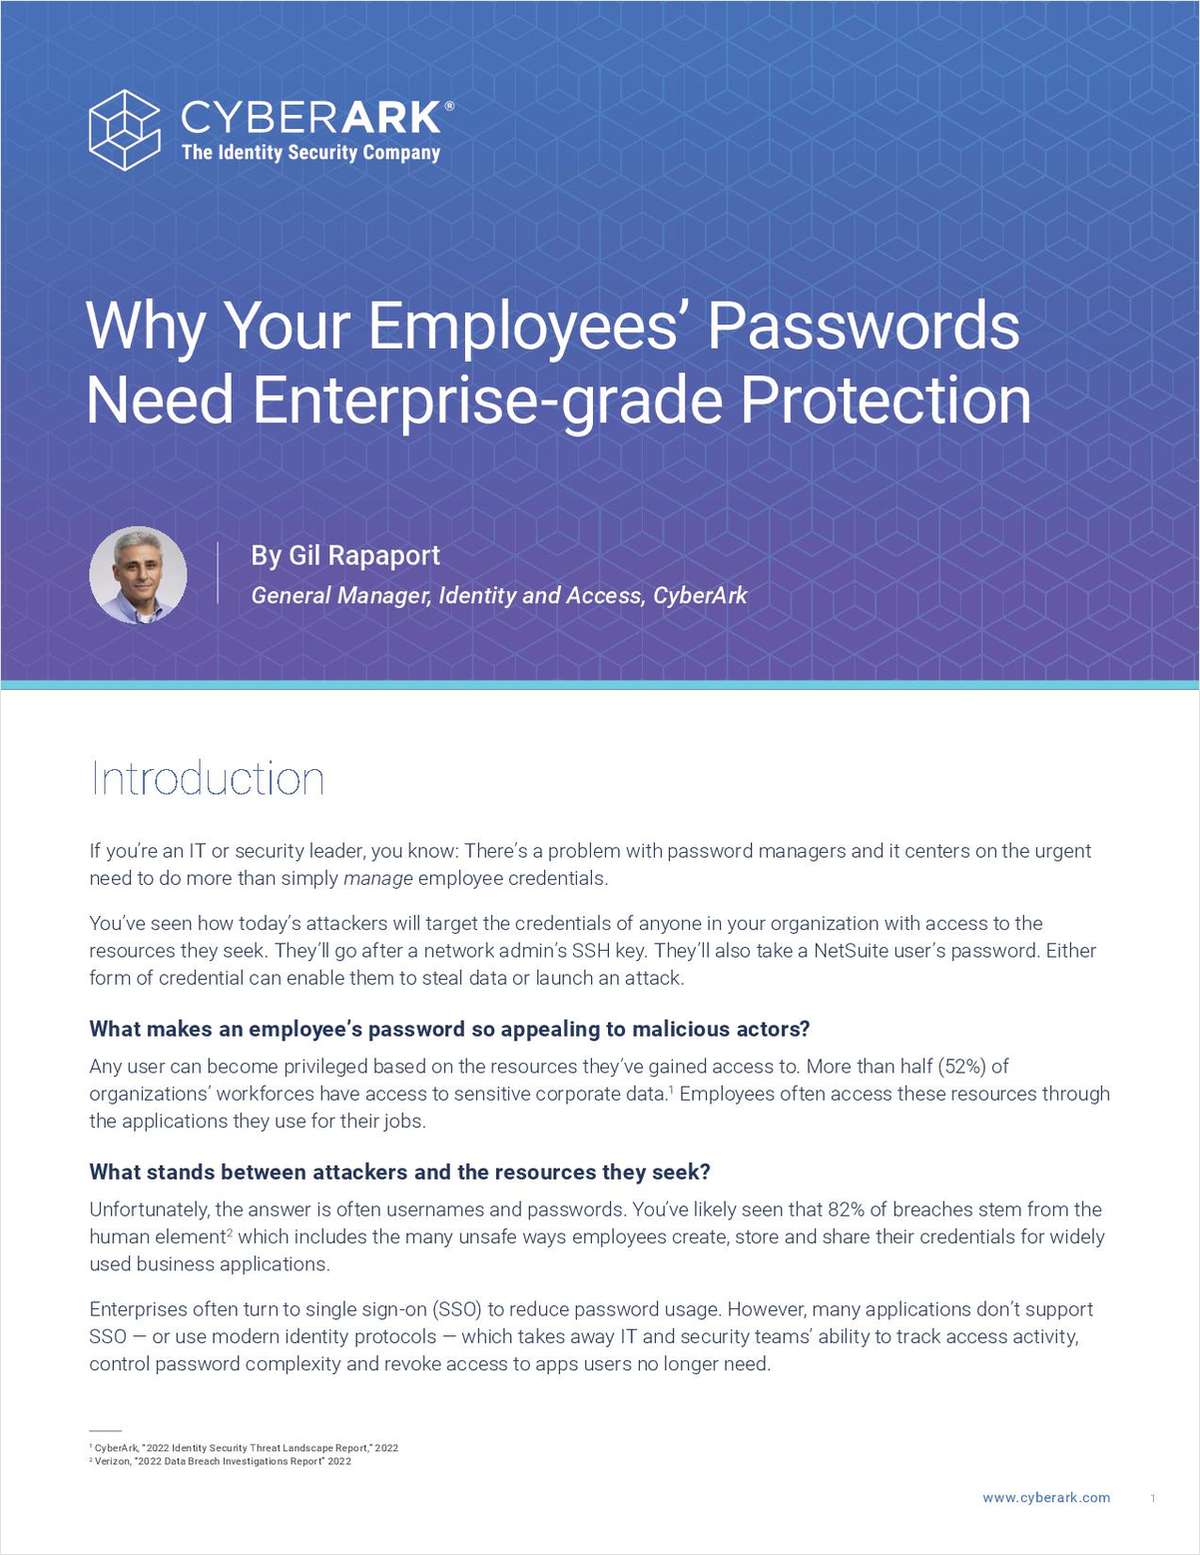 Why Your Employees' Passwords Need Enterprise-grade Protection